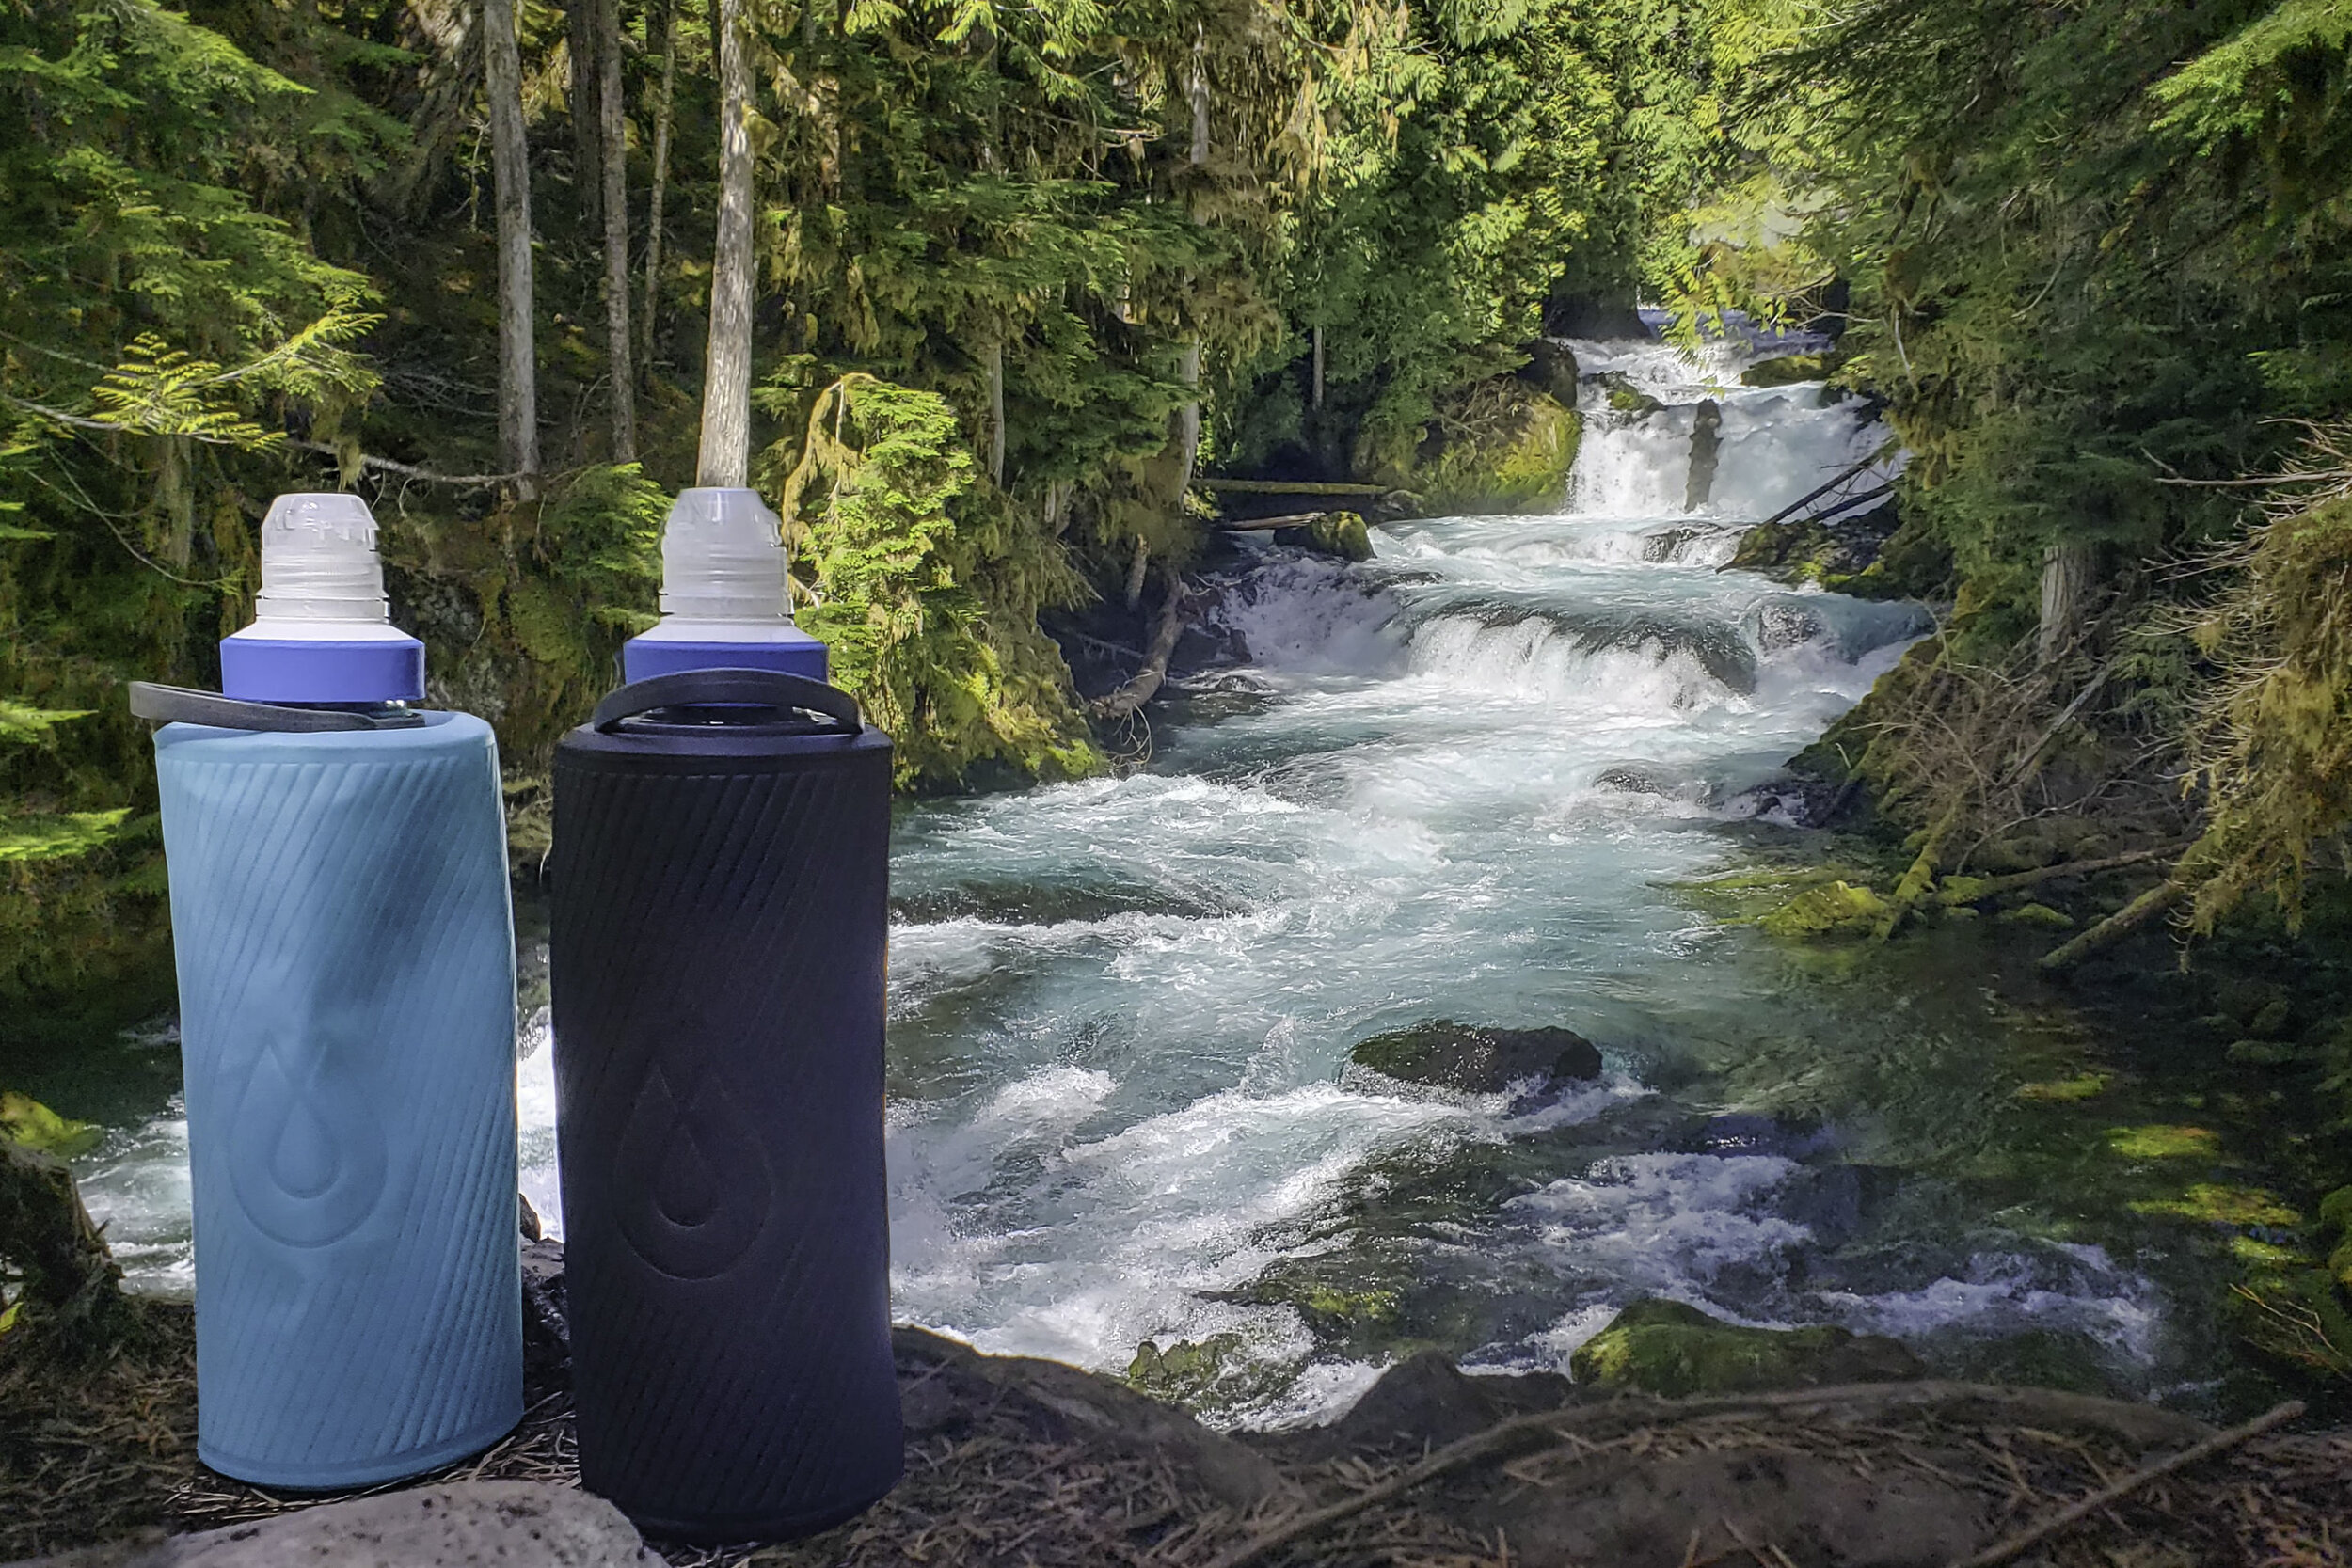 The Katadyn BeFree and Hydrapak Flux water bottle make for a convenient and ultralight water system.